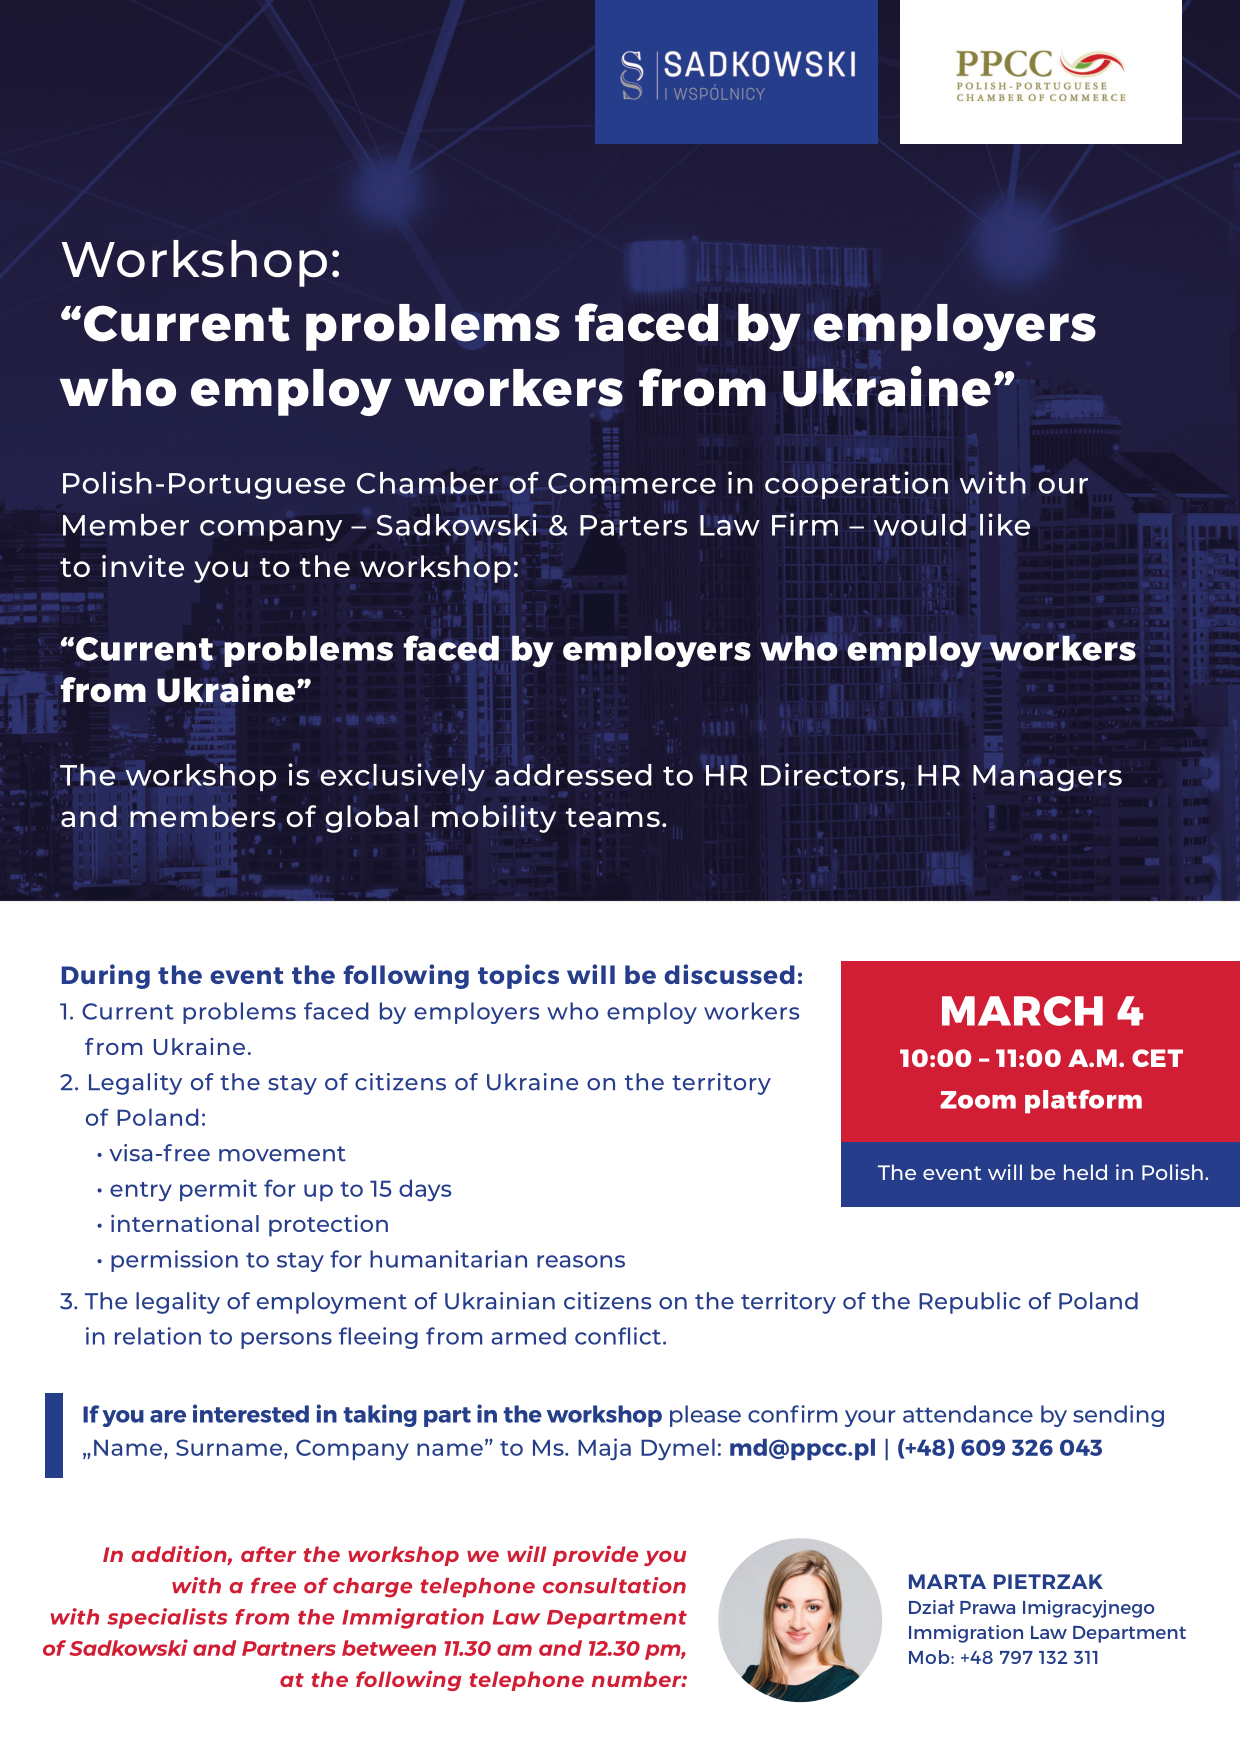 "Current problems faced by employers who employ workers from Ukraine" - Workshop & Free Consultation for PPCC Members